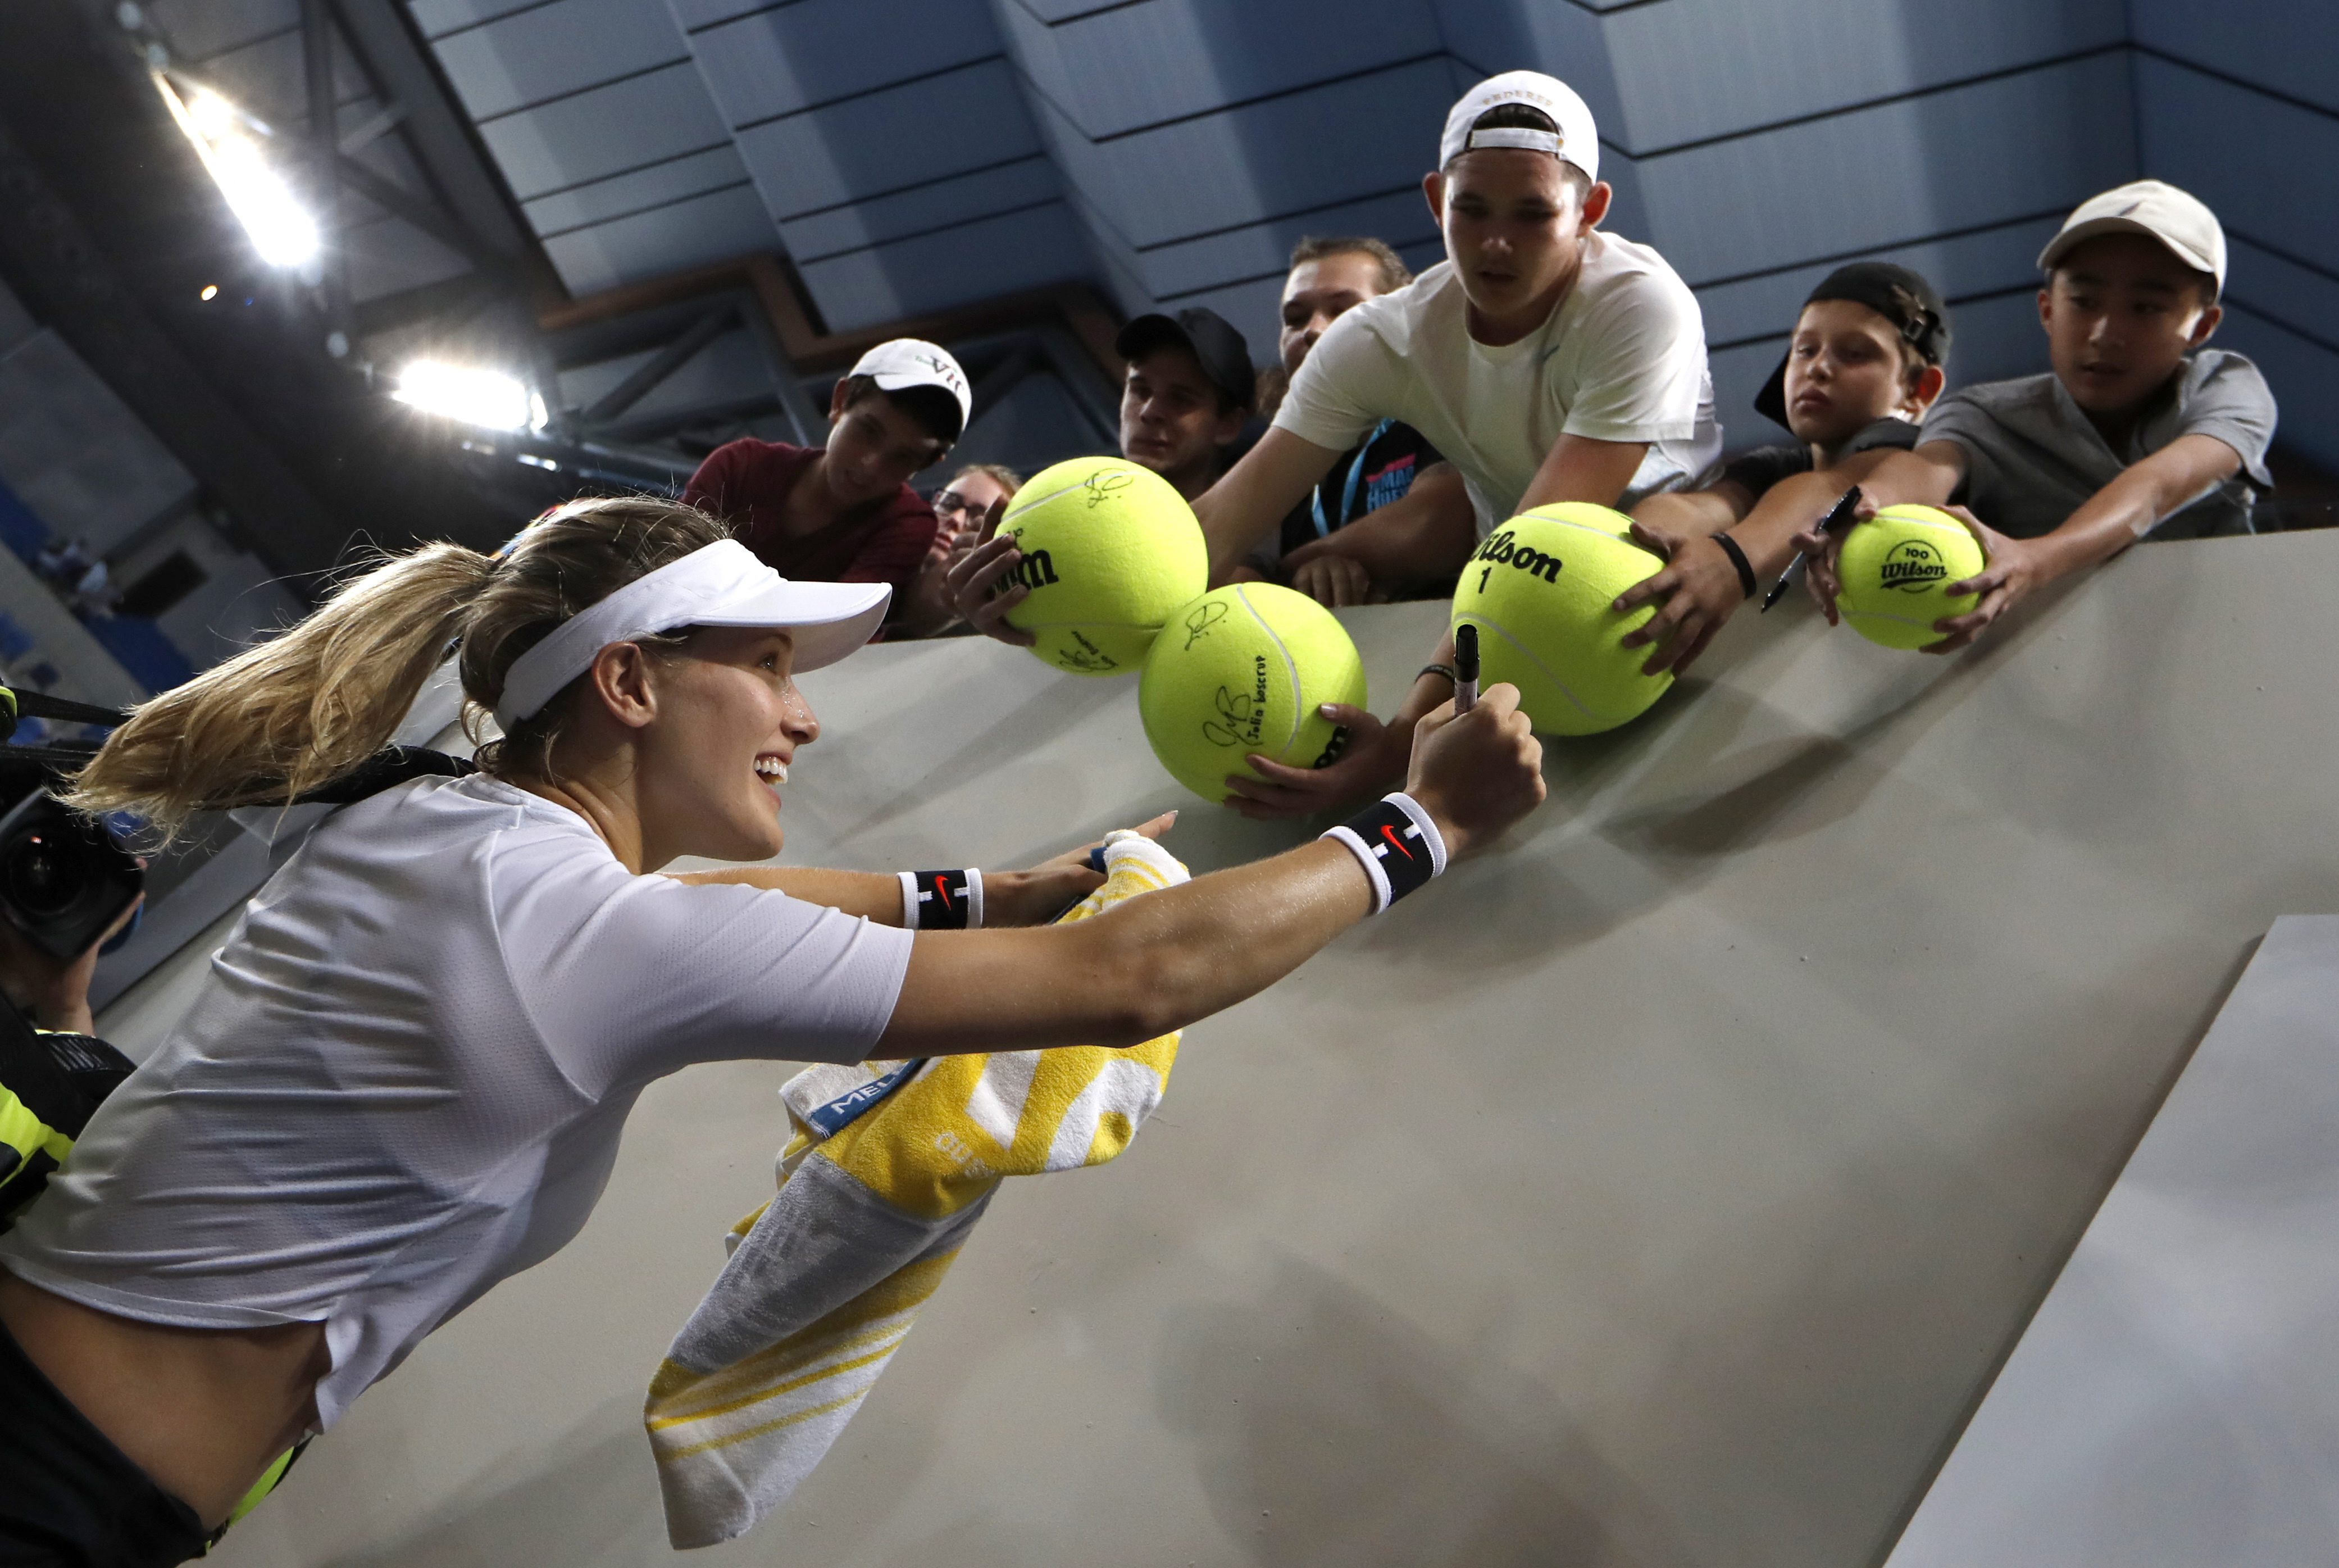 Canada's Eugenie Bouchard signs autographs for fans after defeating United States' Louisa Chirico in their first round match at the Australian Open tennis championships in Melbourne, Australia, Tuesday, Jan. 17, 2017. (AP Photo/Kin Cheung)